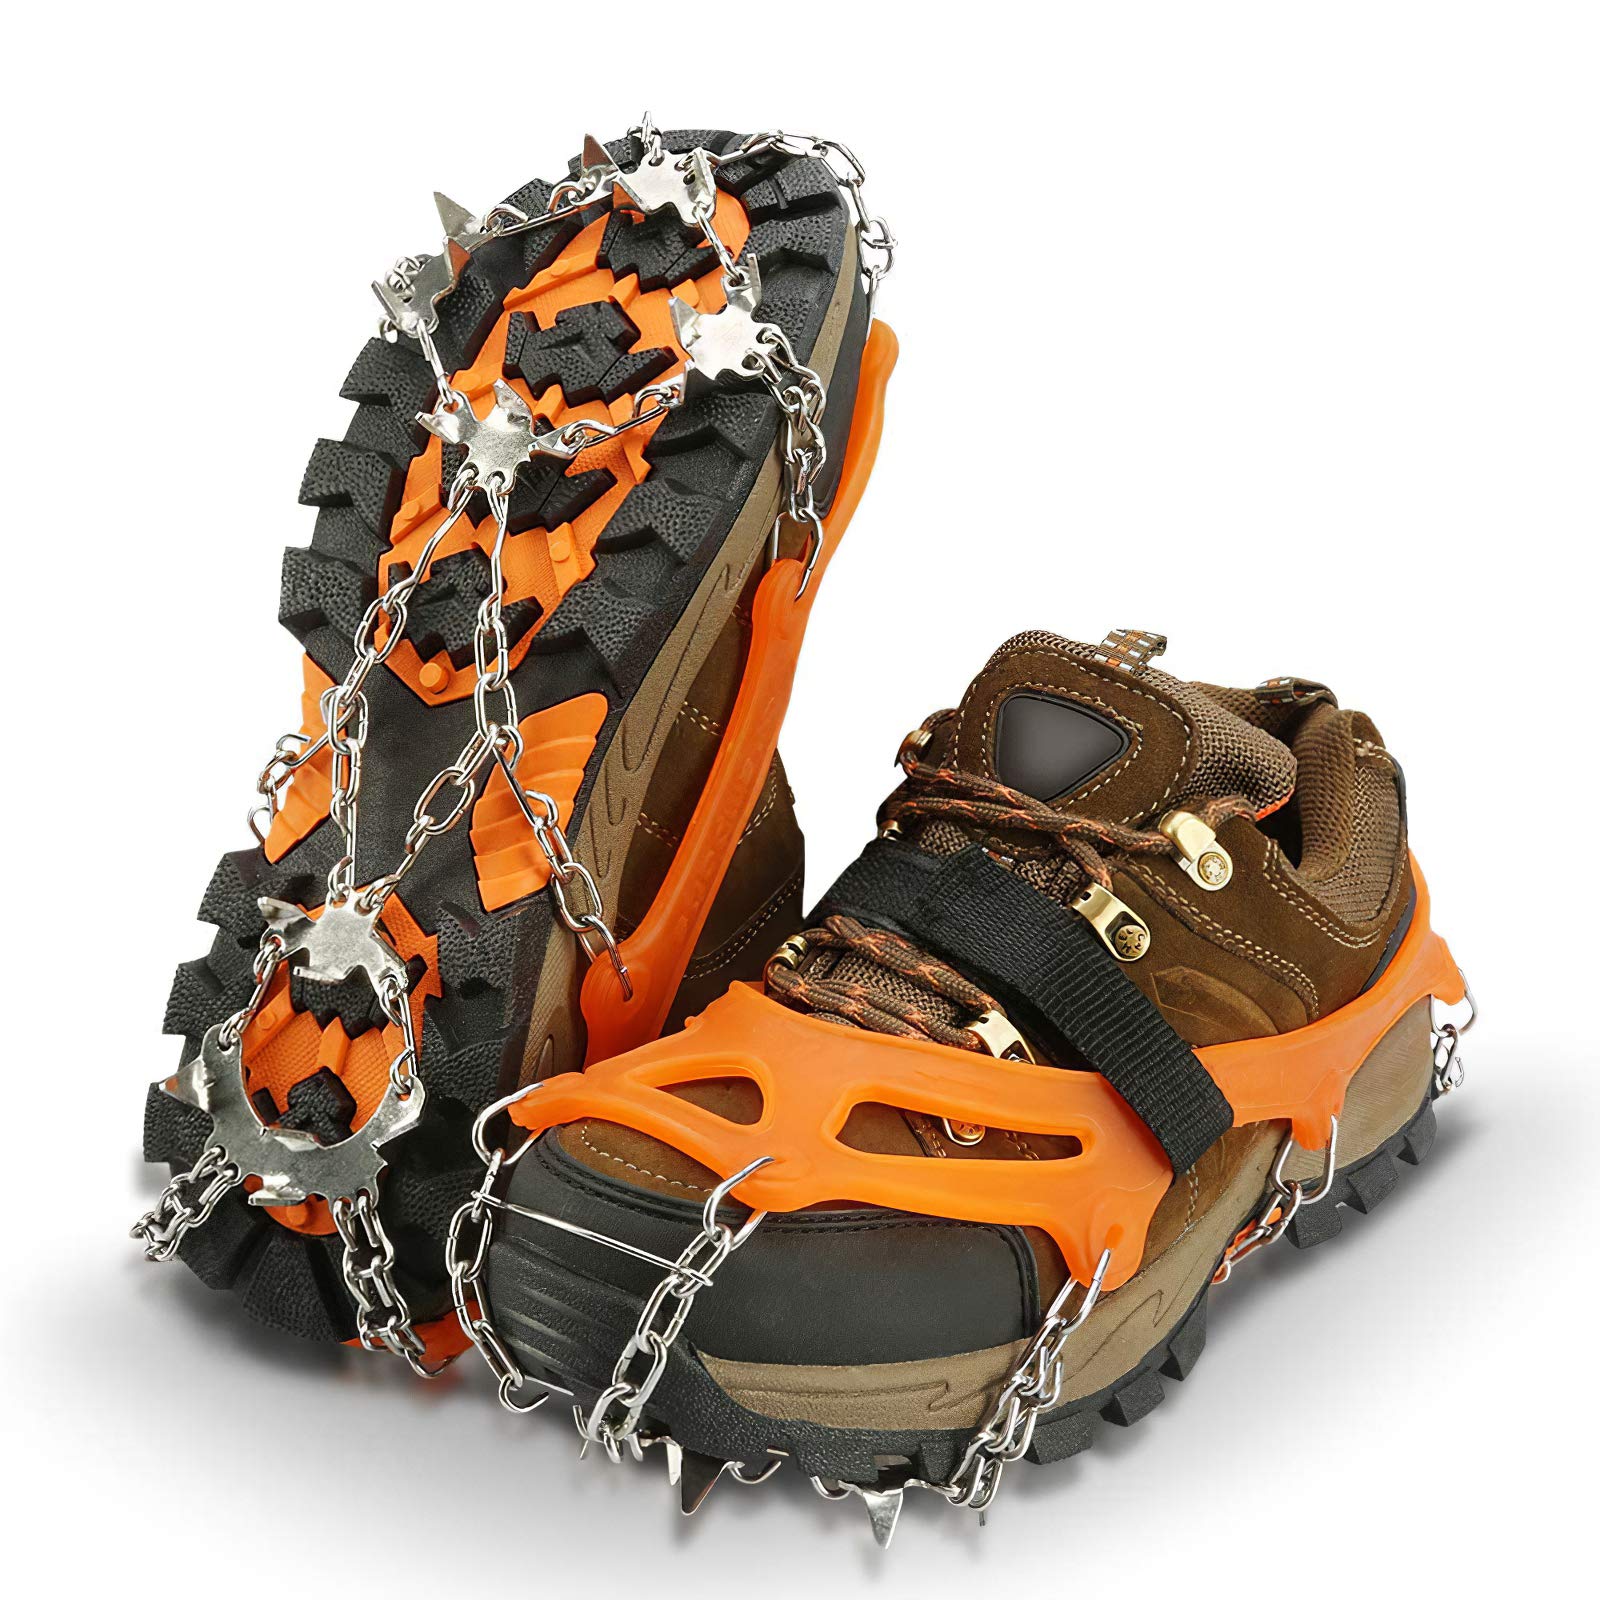 IPSXP Crampons Ice Cleats Traction Snow Grips for Boots Shoes